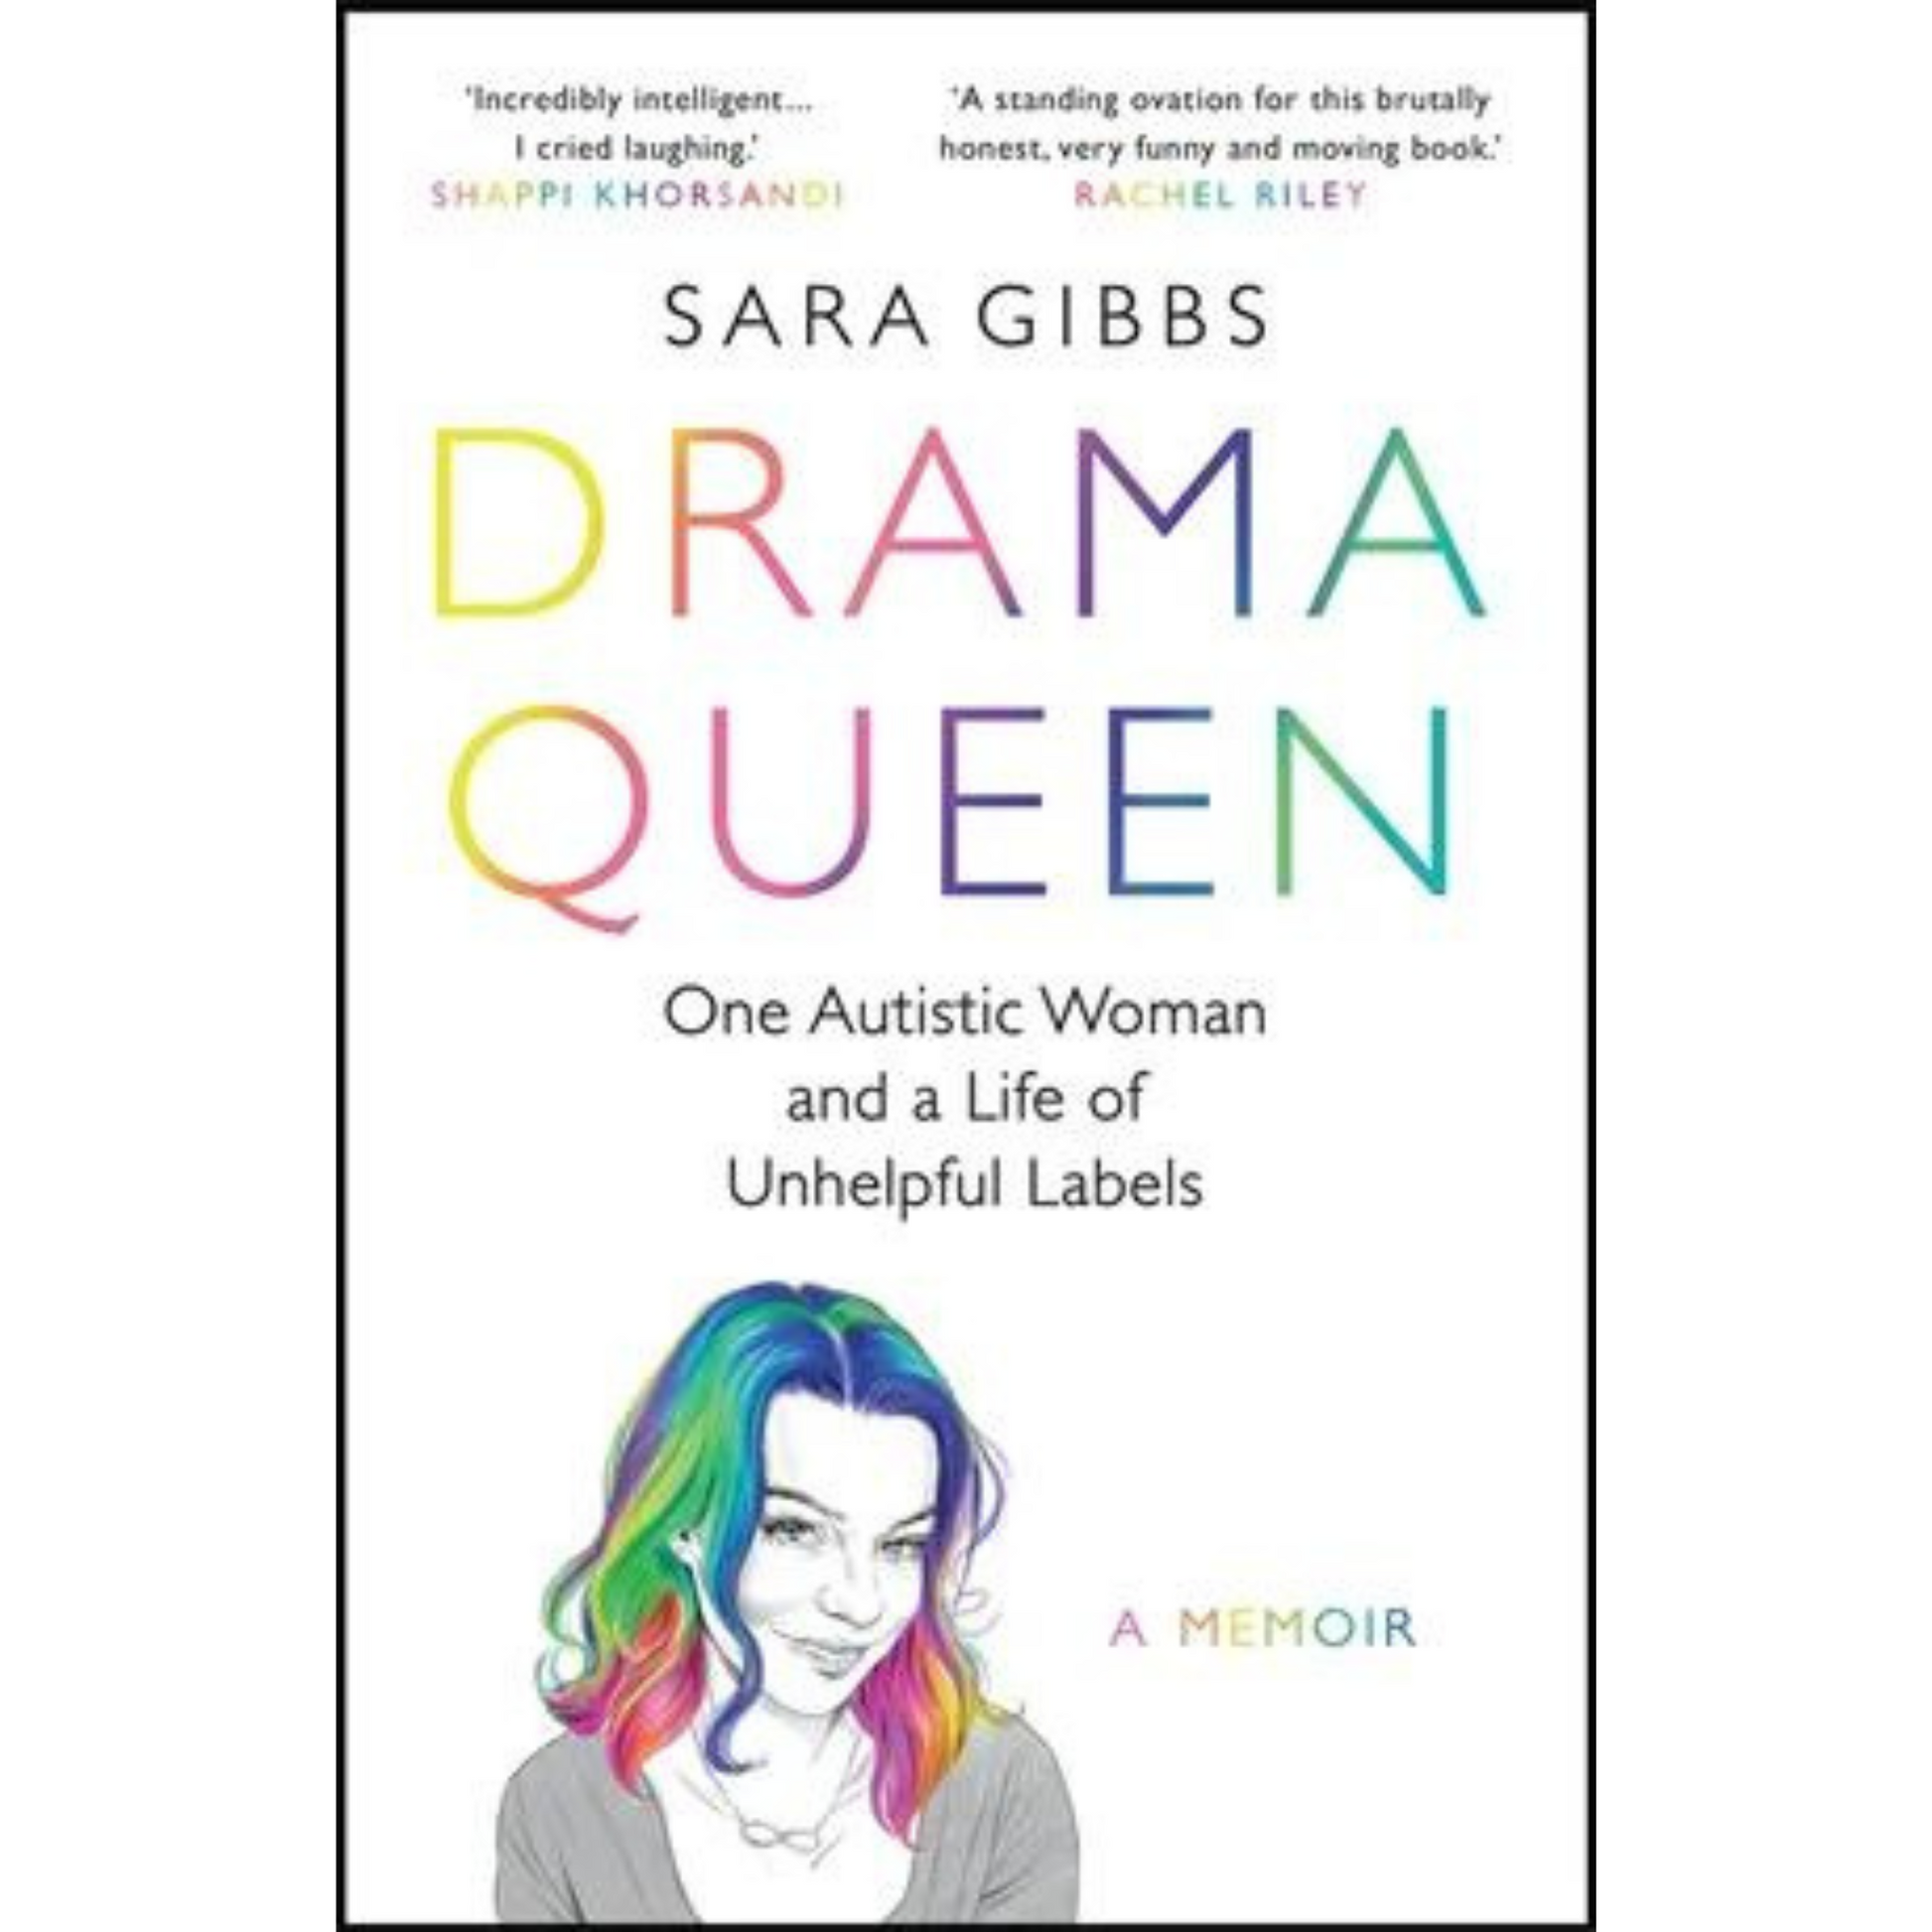 Book_Drama_Queen_One_Autistic_Woman_and_a_life_of_unhelpful_labels_By_Sara_Gibbs